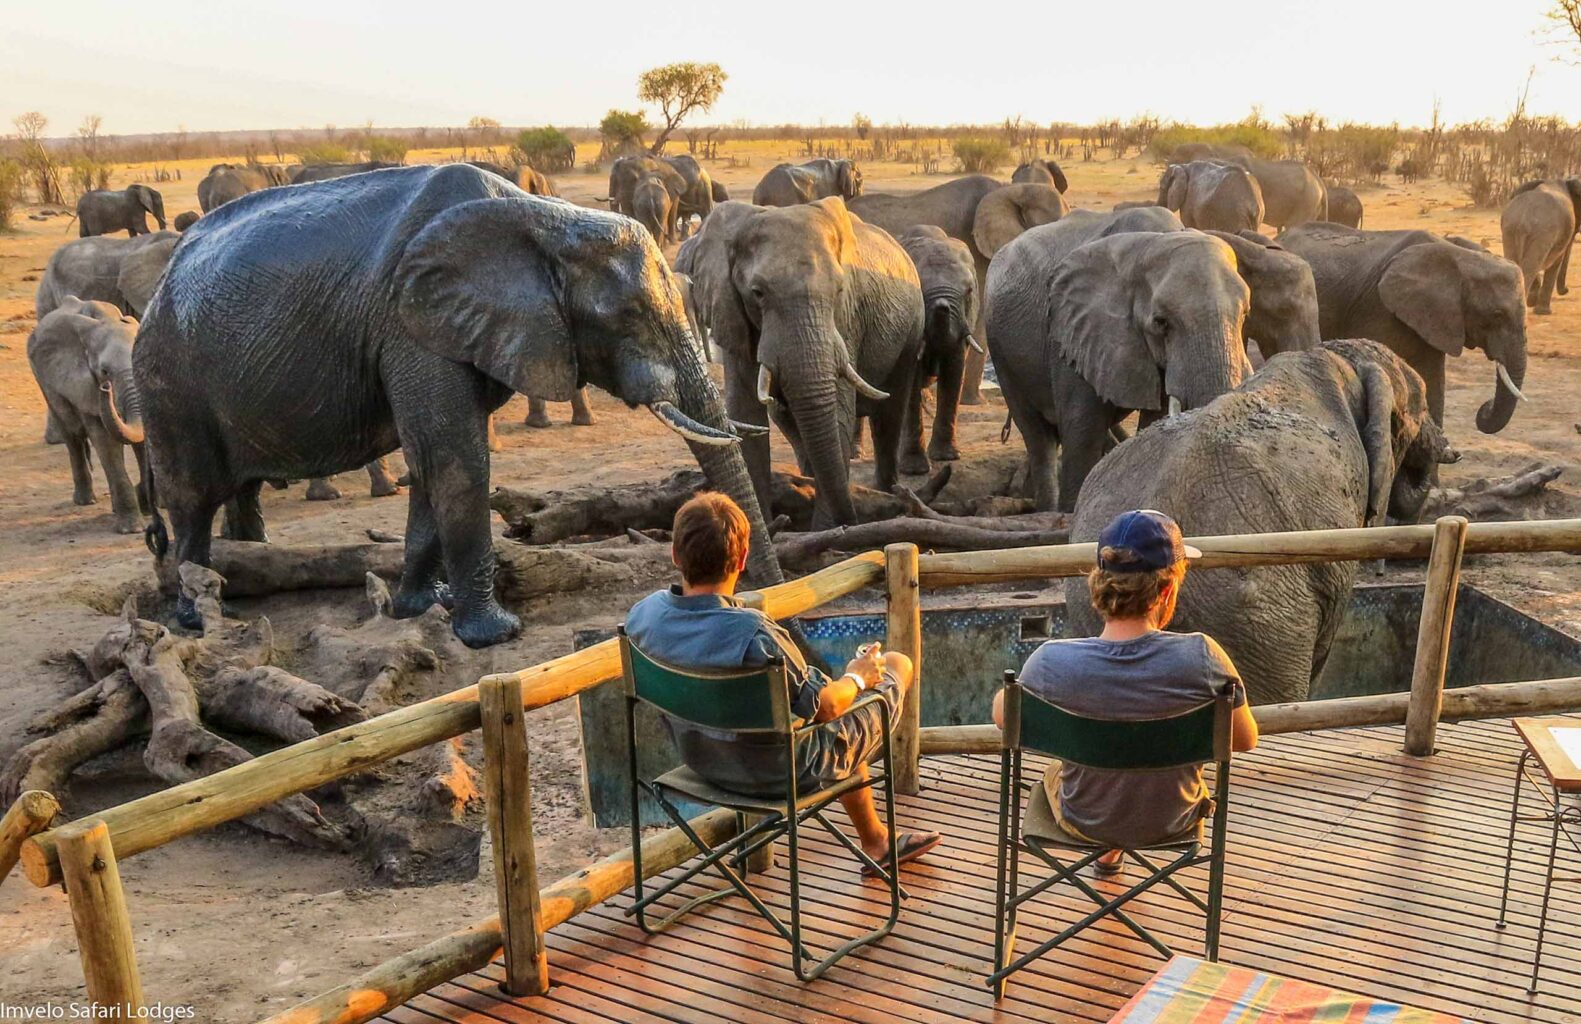 Two travelers observing elephants from Nehimba Lodge.